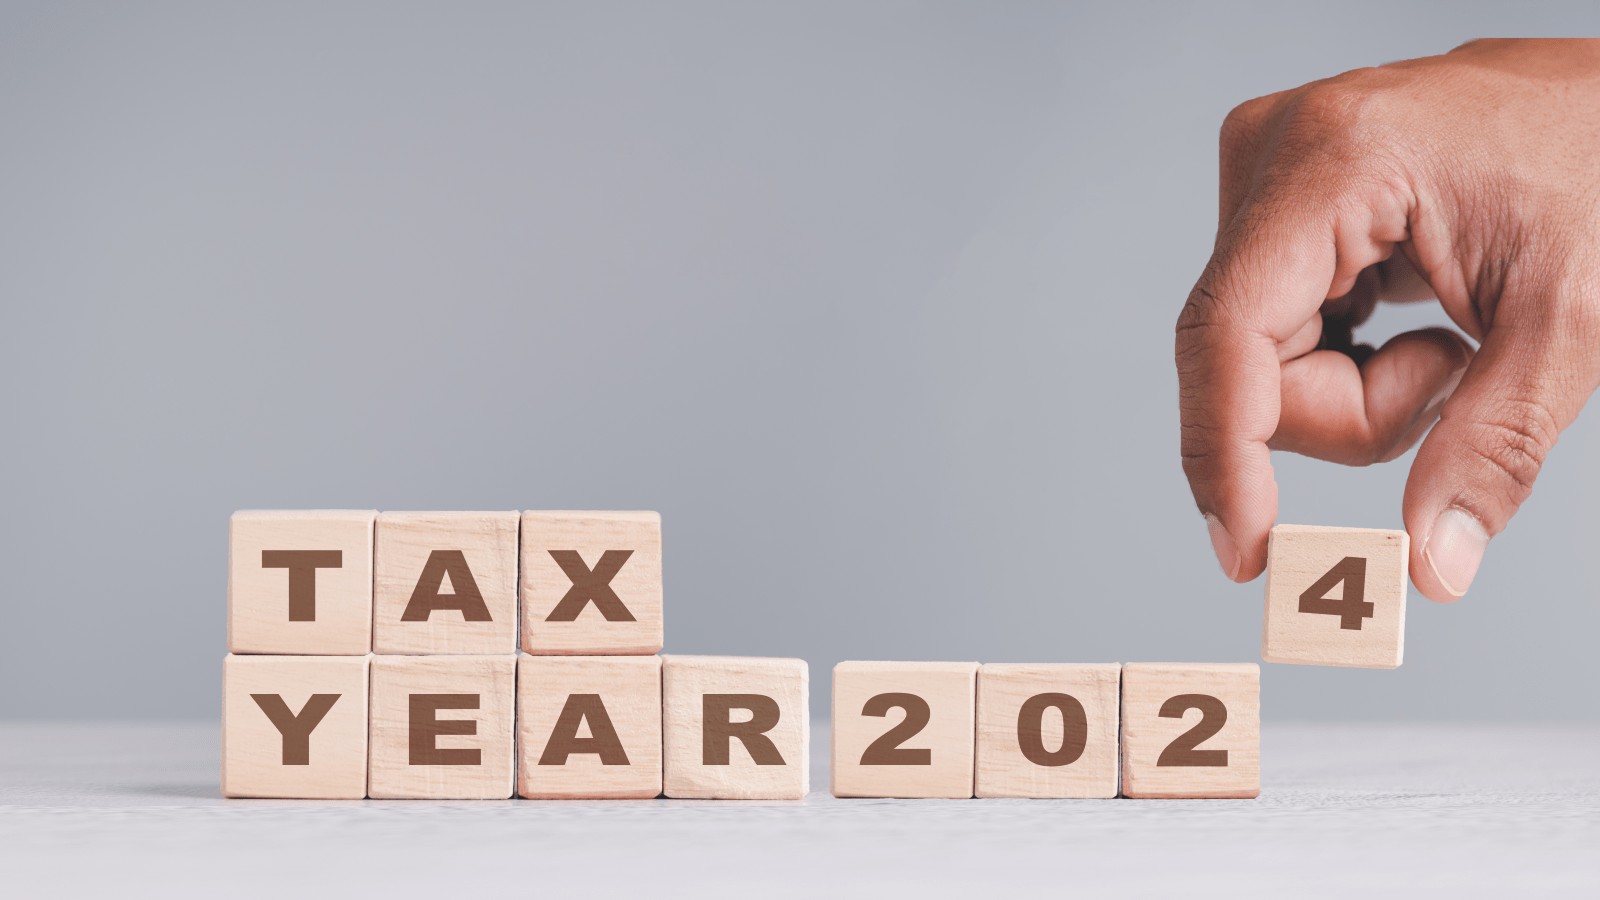 A hand placing the last of wooden blocks in a series, spelling out 'TAX YEAR 2024' on a light gray surface.